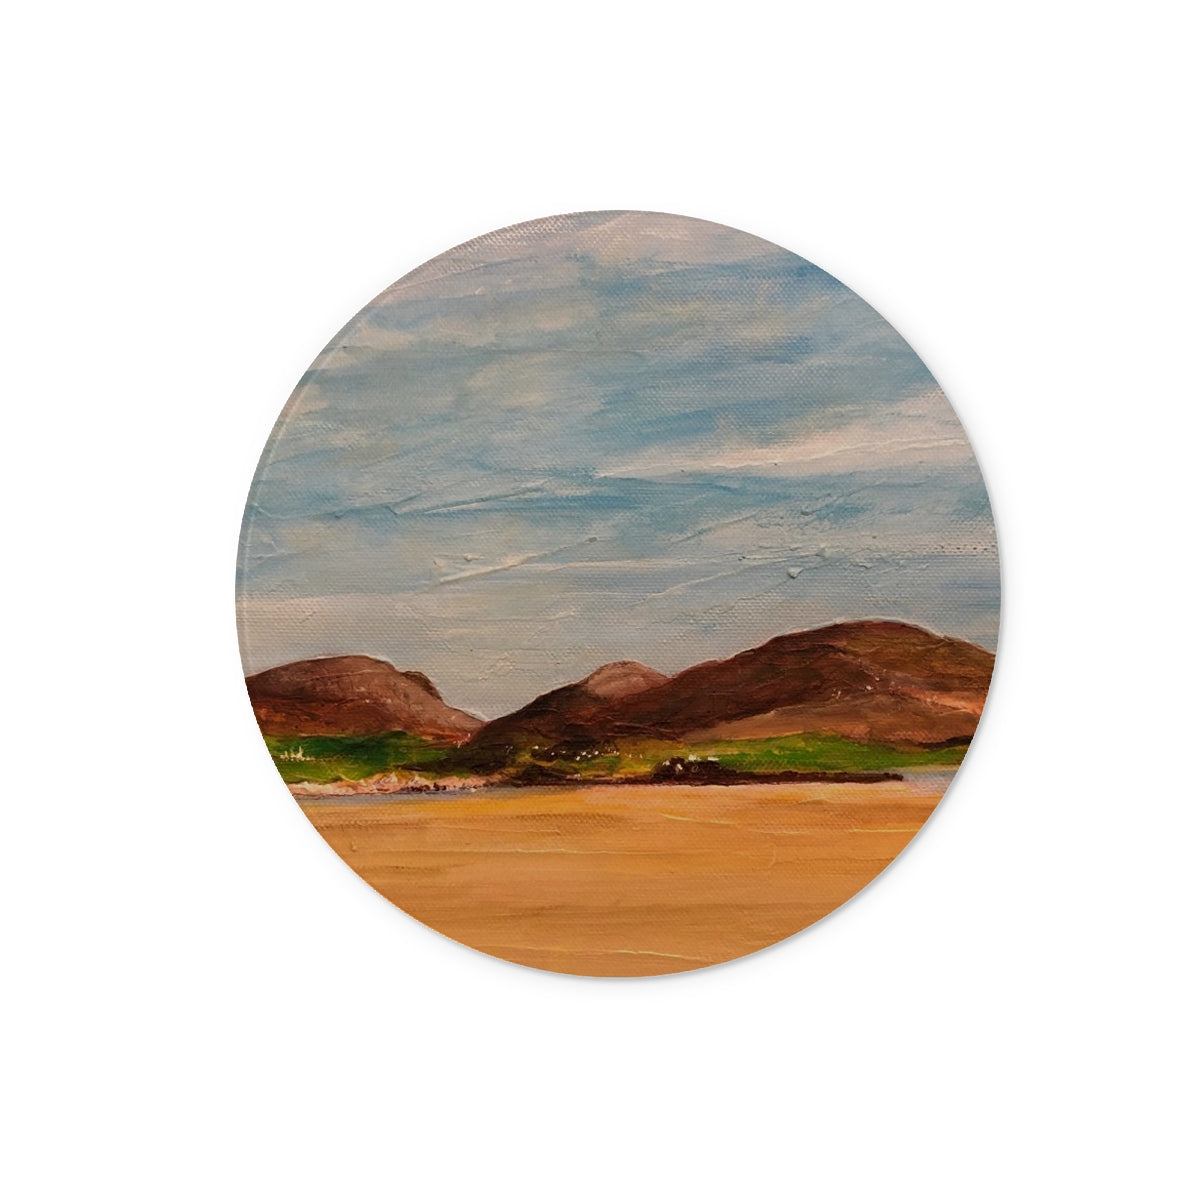 Uig Sands Lewis Art Gifts Glass Chopping Board-Glass Chopping Boards-Hebridean Islands Art Gallery-12" Round-Paintings, Prints, Homeware, Art Gifts From Scotland By Scottish Artist Kevin Hunter